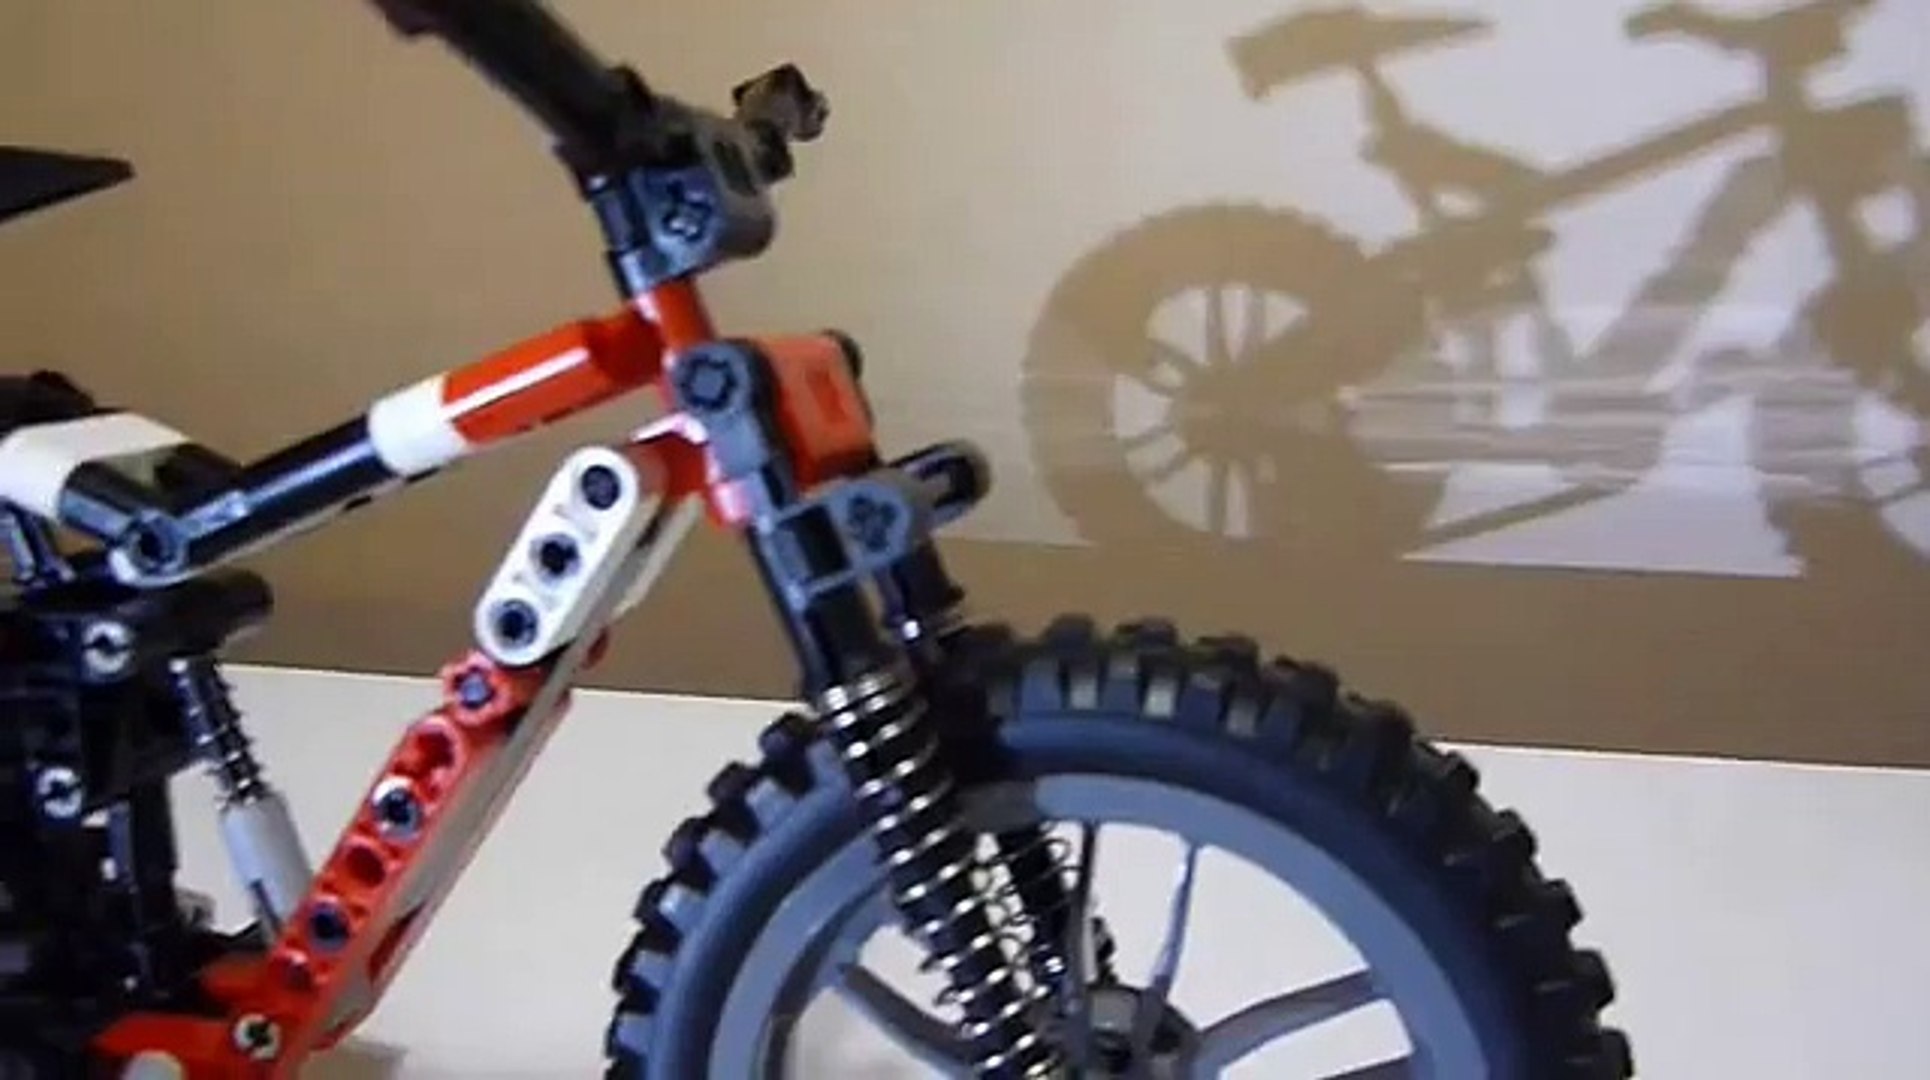 Lego Technic Specialized Safire Mountain Bike Model - MTB bicycle -  building instructions - video Dailymotion